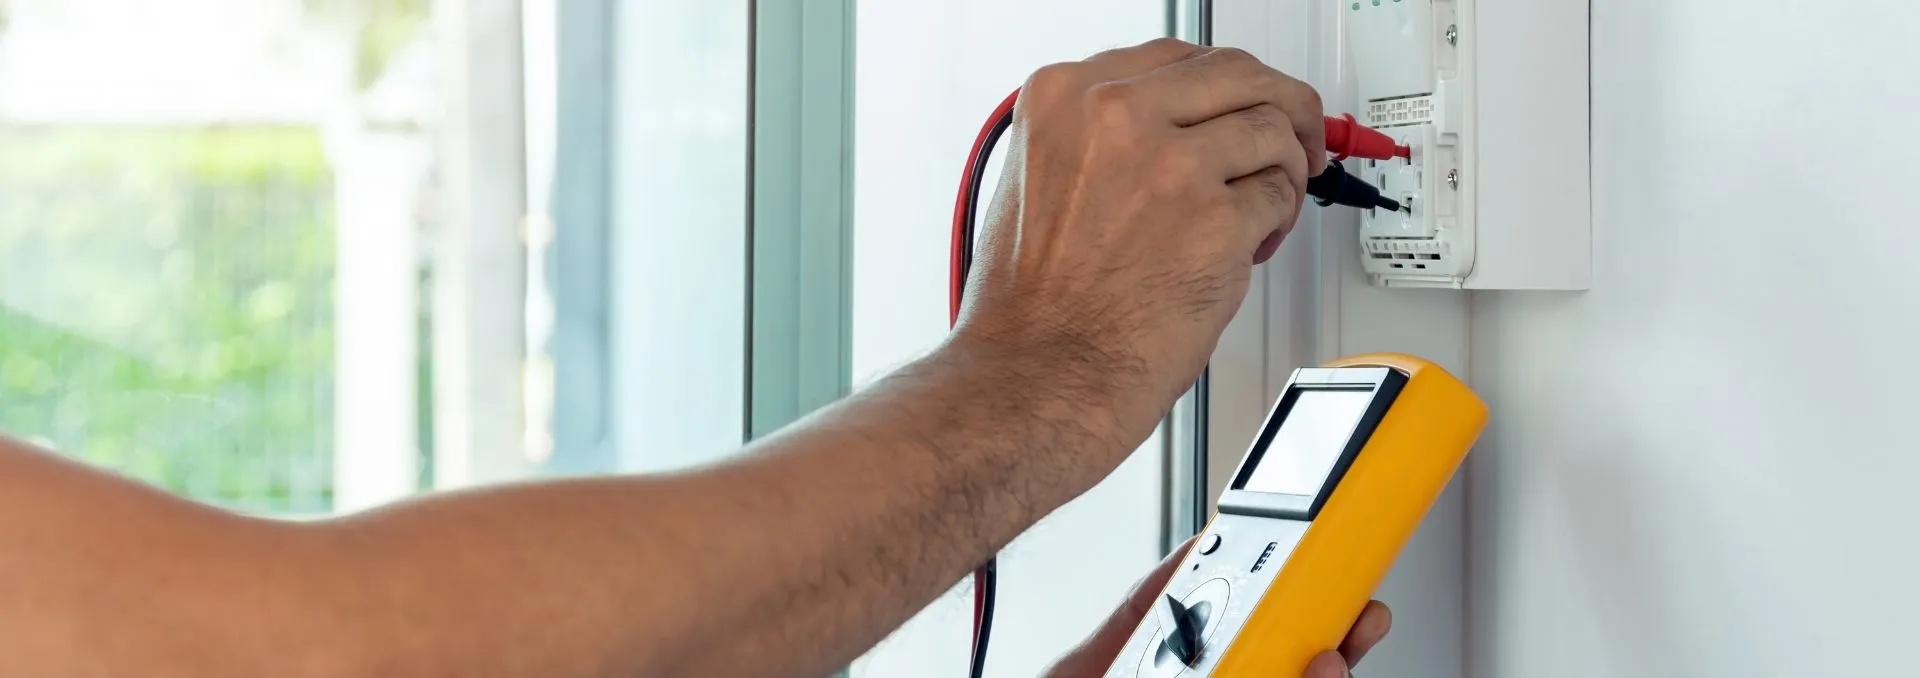 5 Common Electrical Problems and How to Fix Them